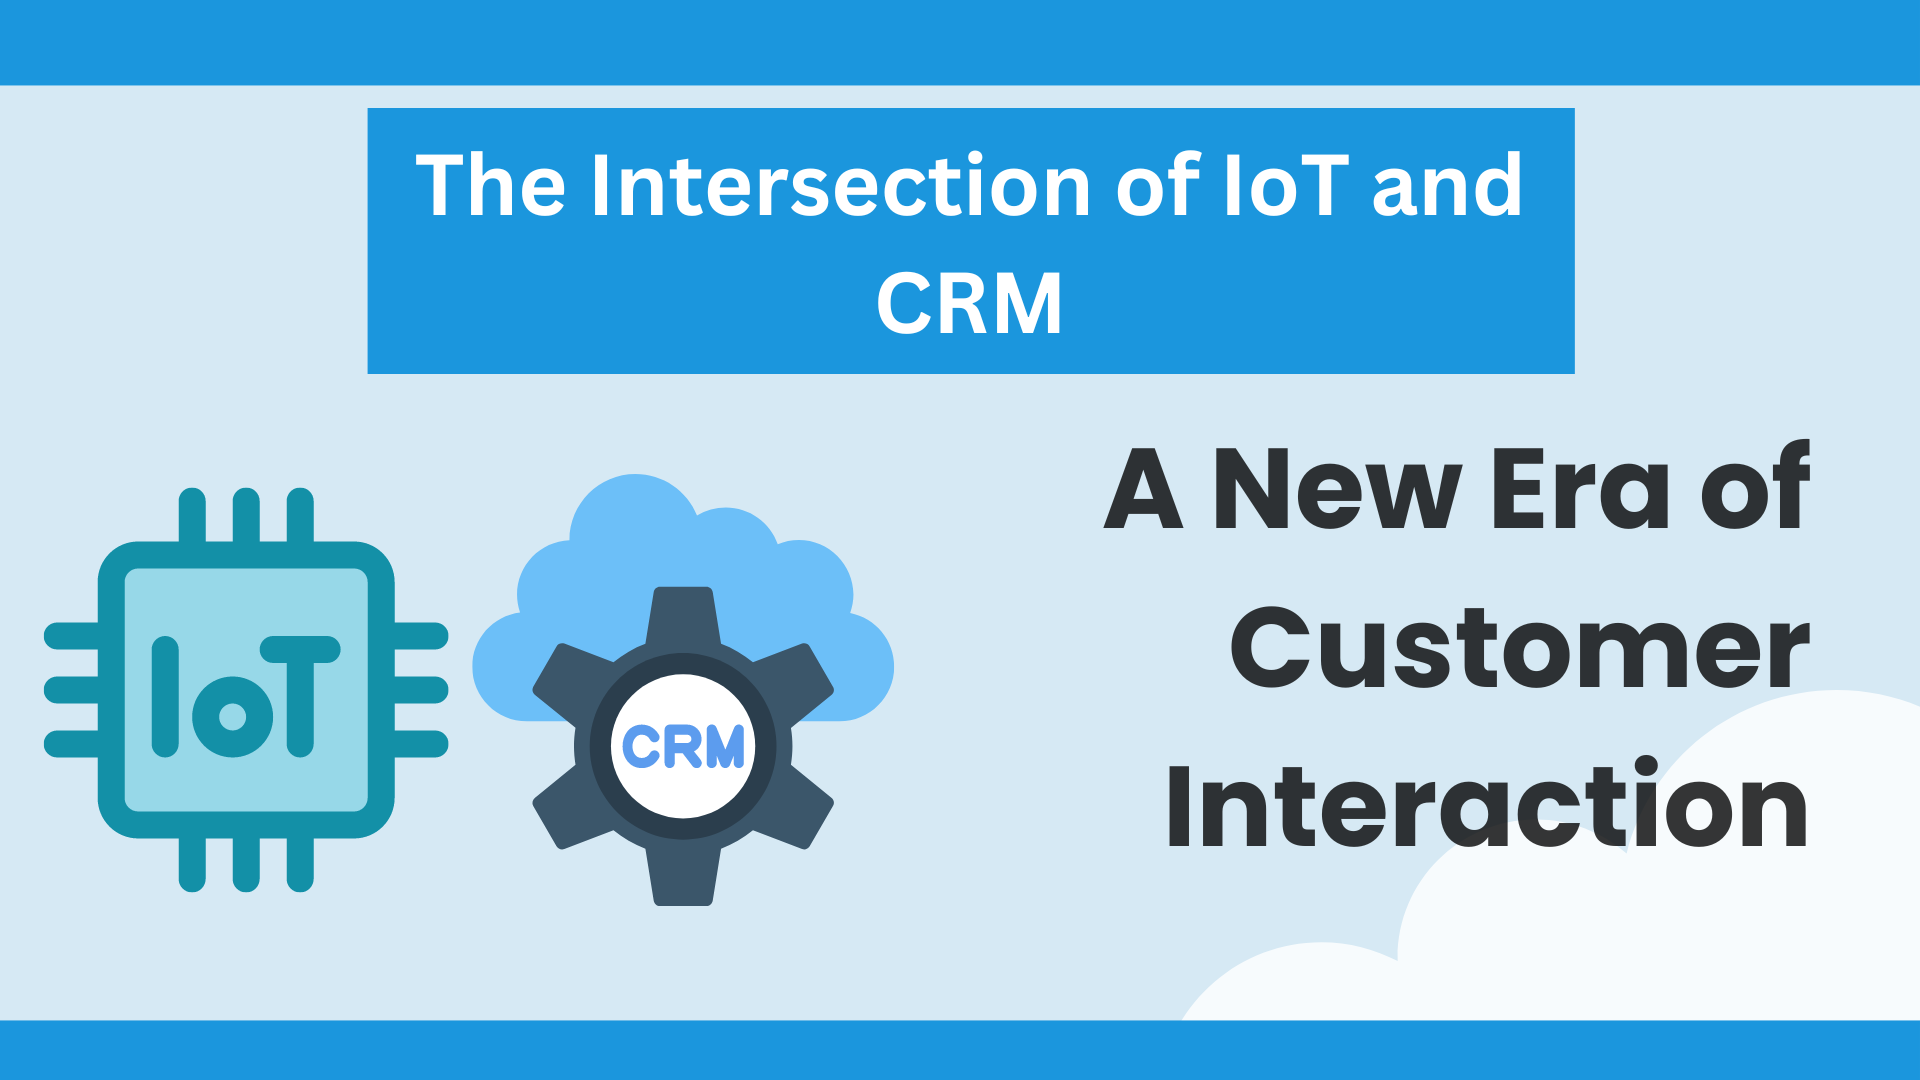 The Intersection of IoT and CRM: A New Era of Customer Interaction